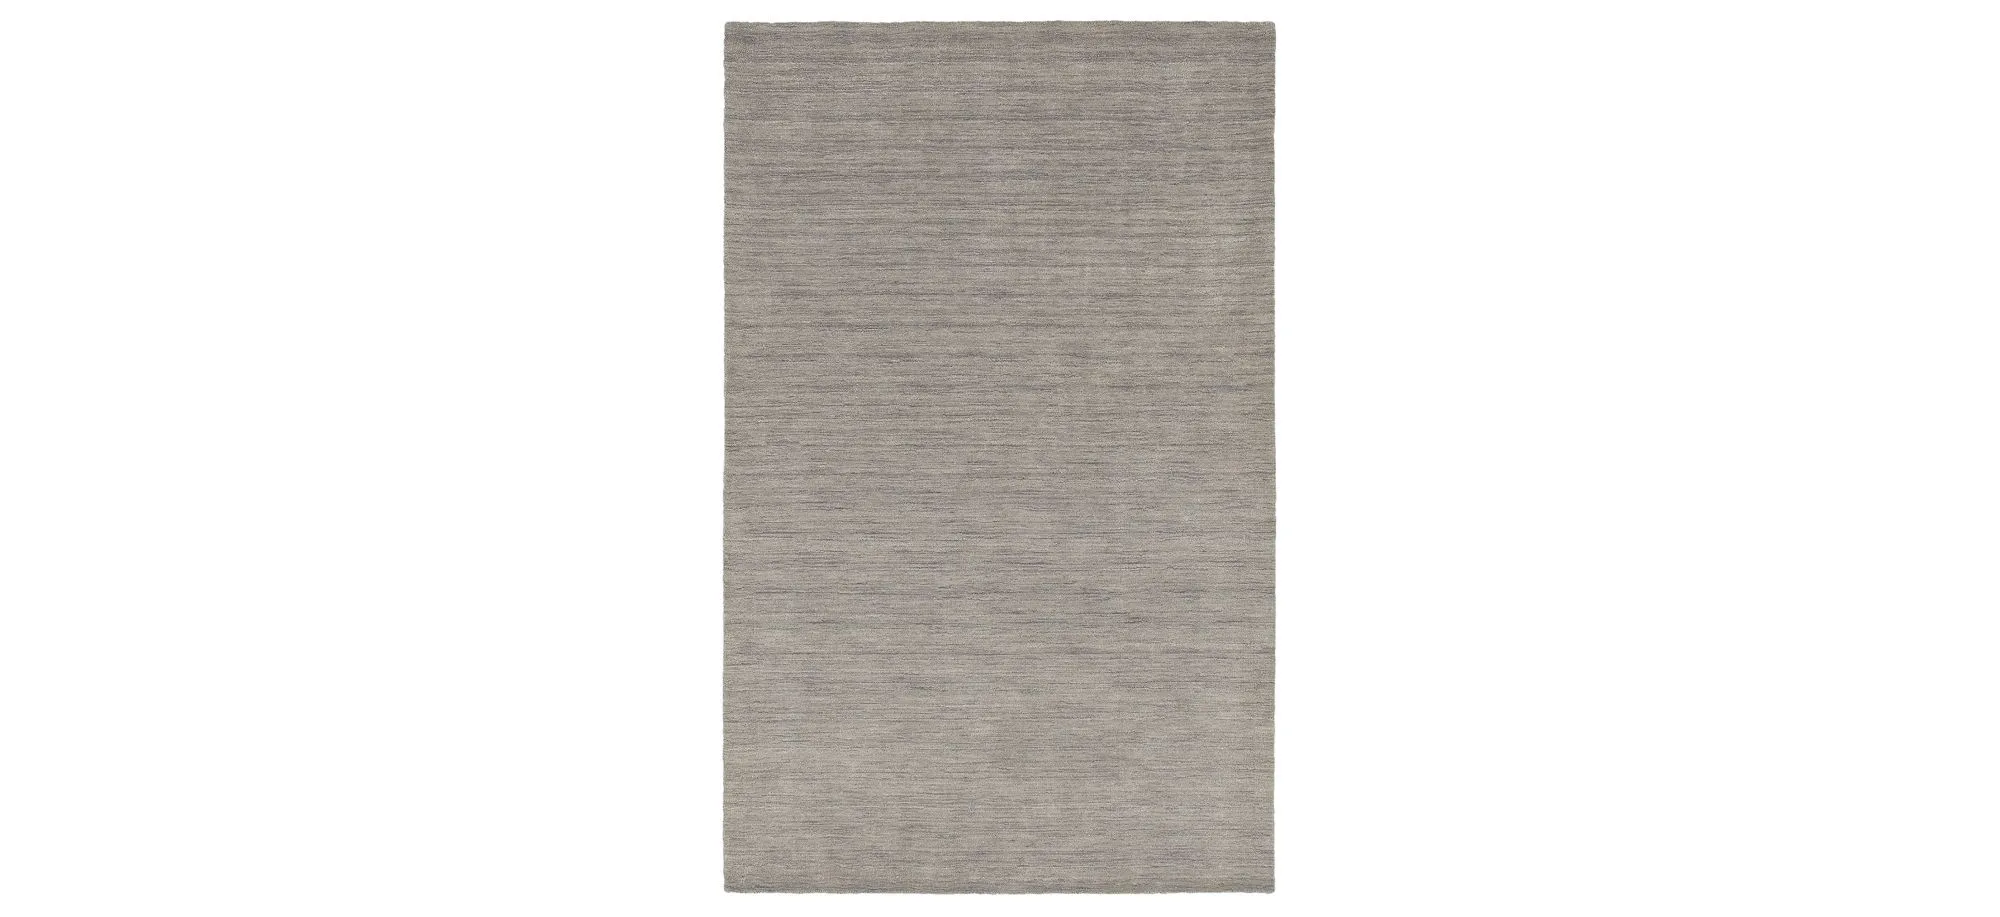 Chelsea Area Rug in Gray by Bellanest